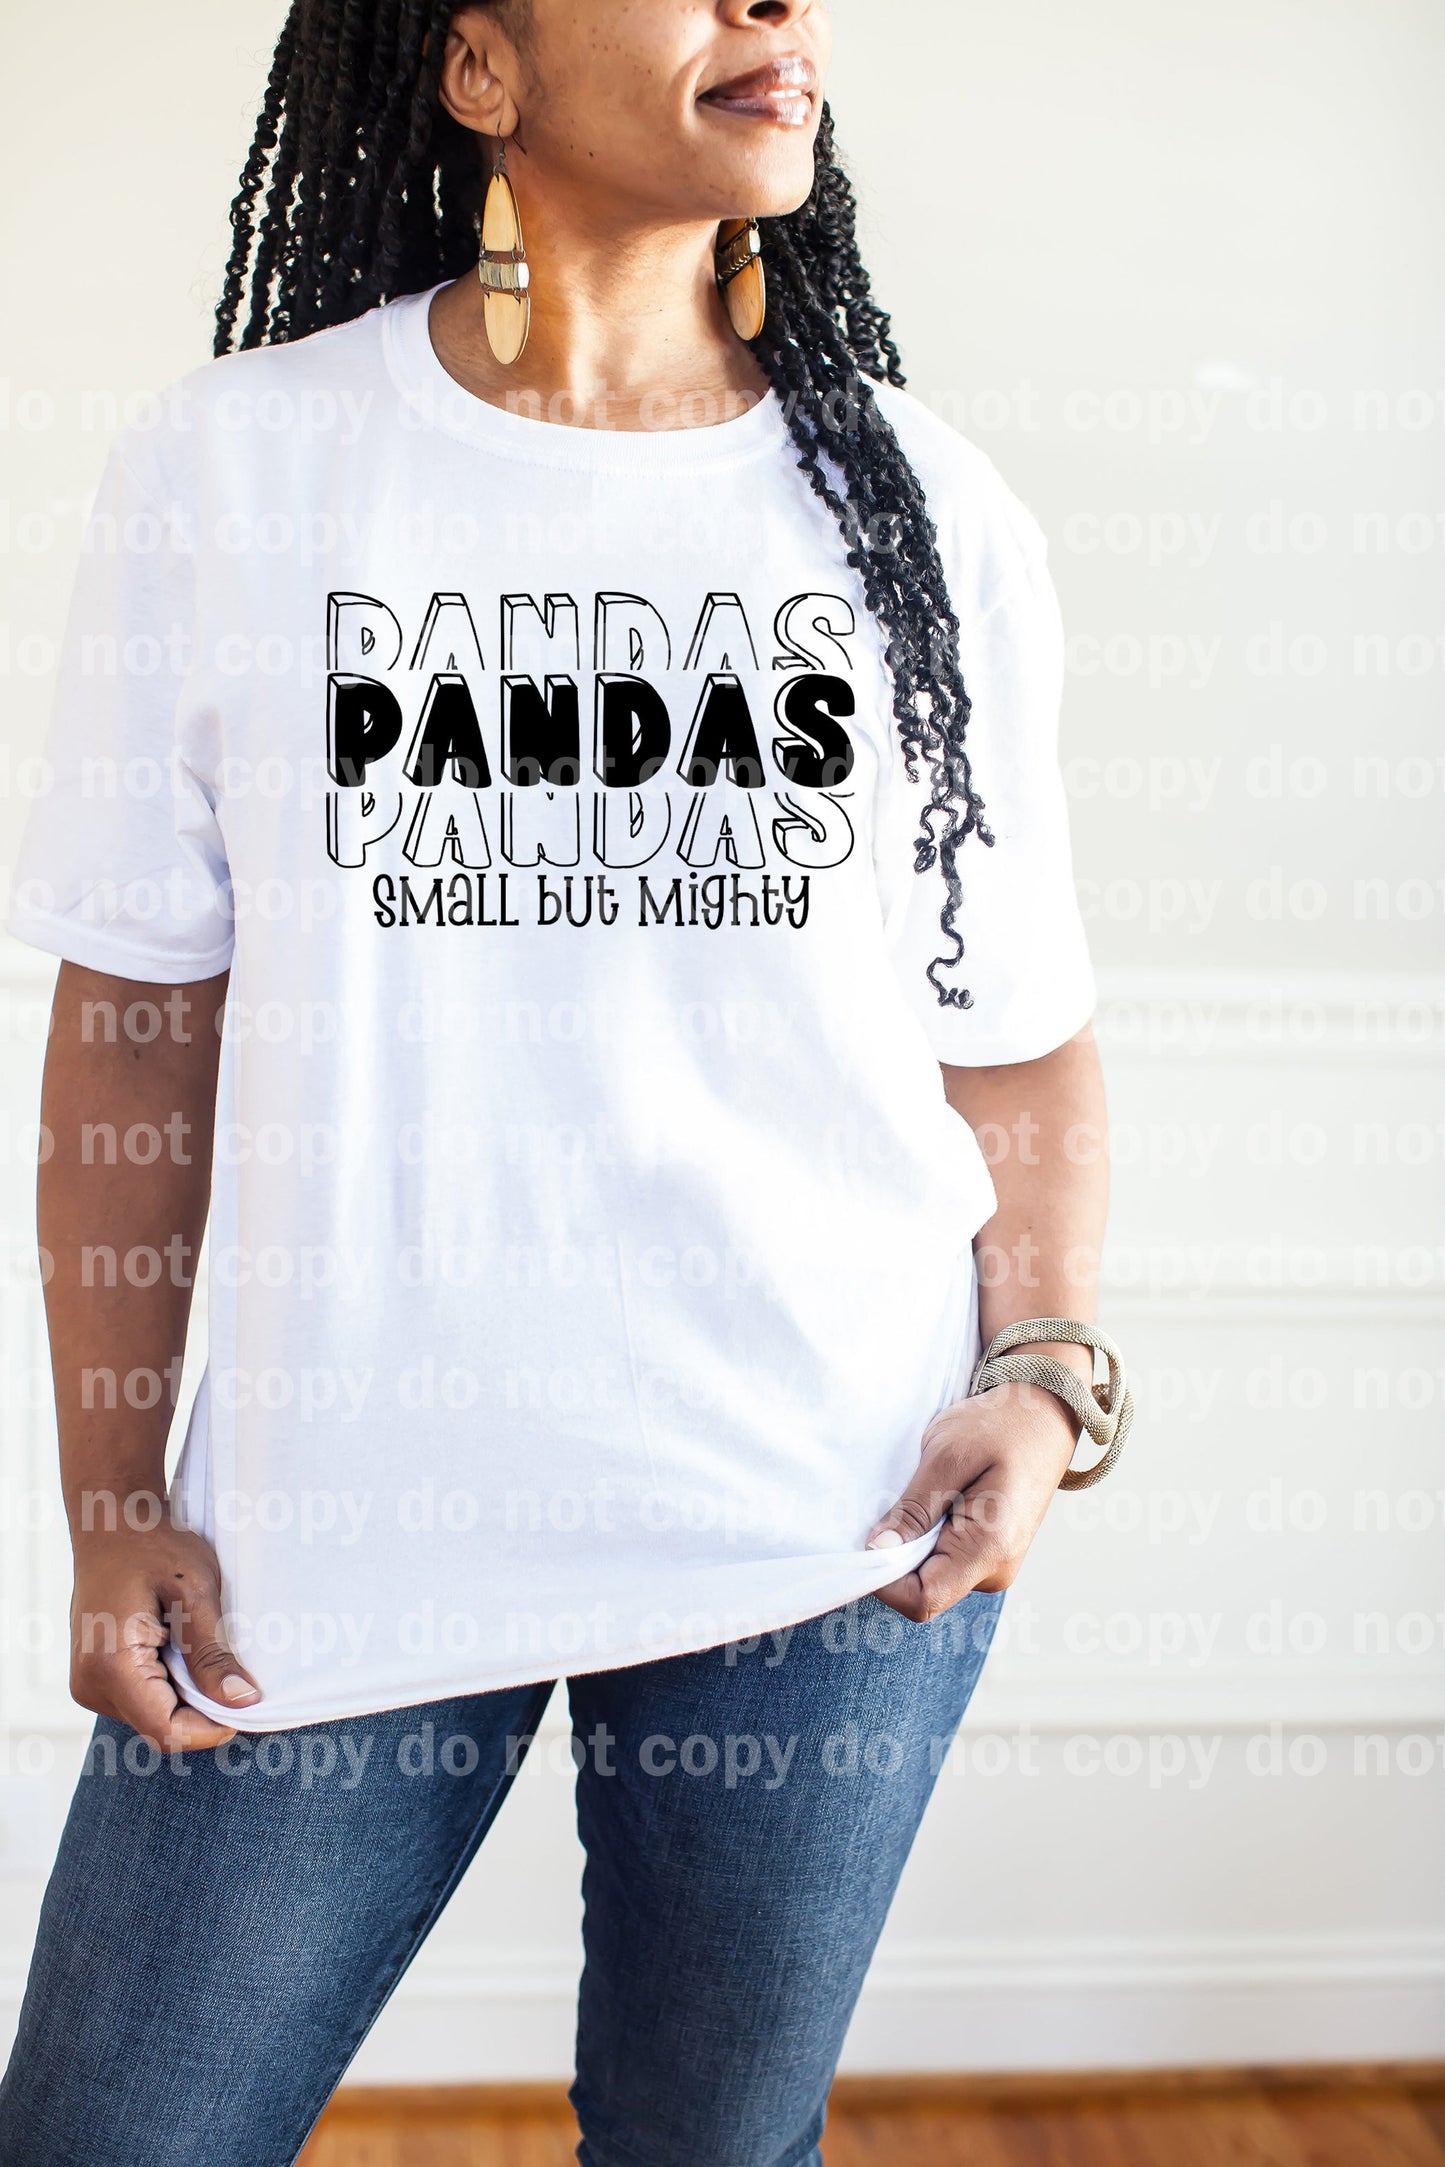 Pandas Small But Mighty Black/White Dream Print or Sublimation Print